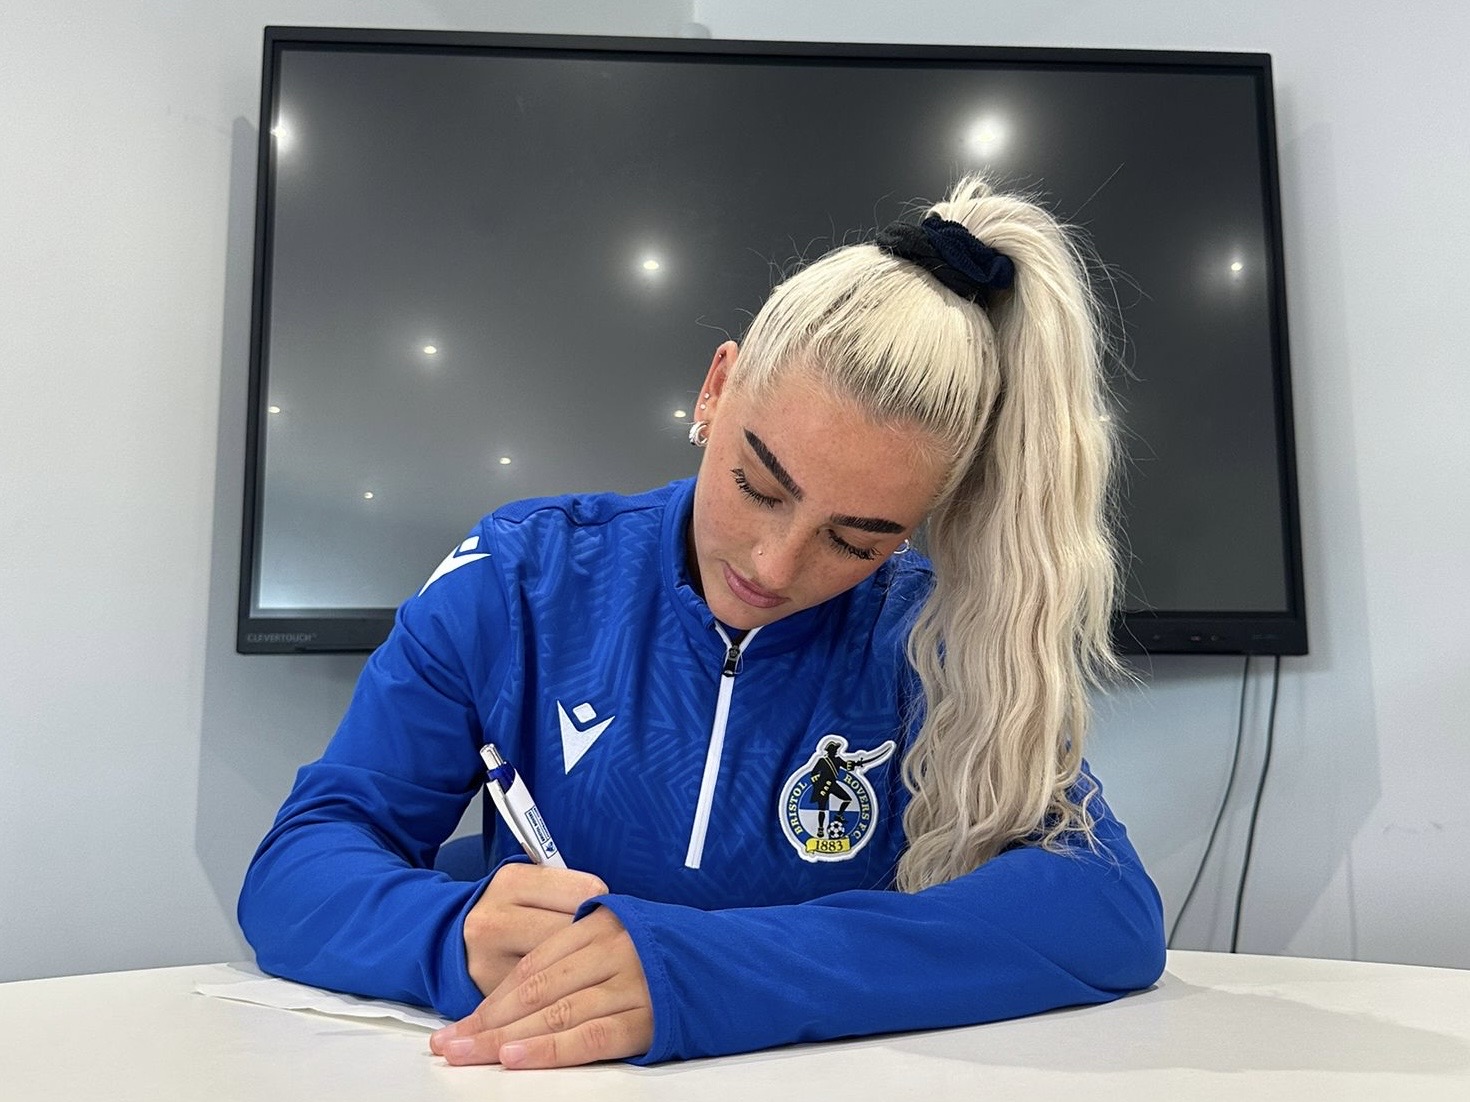 Daisy Ackerman signing a contract.